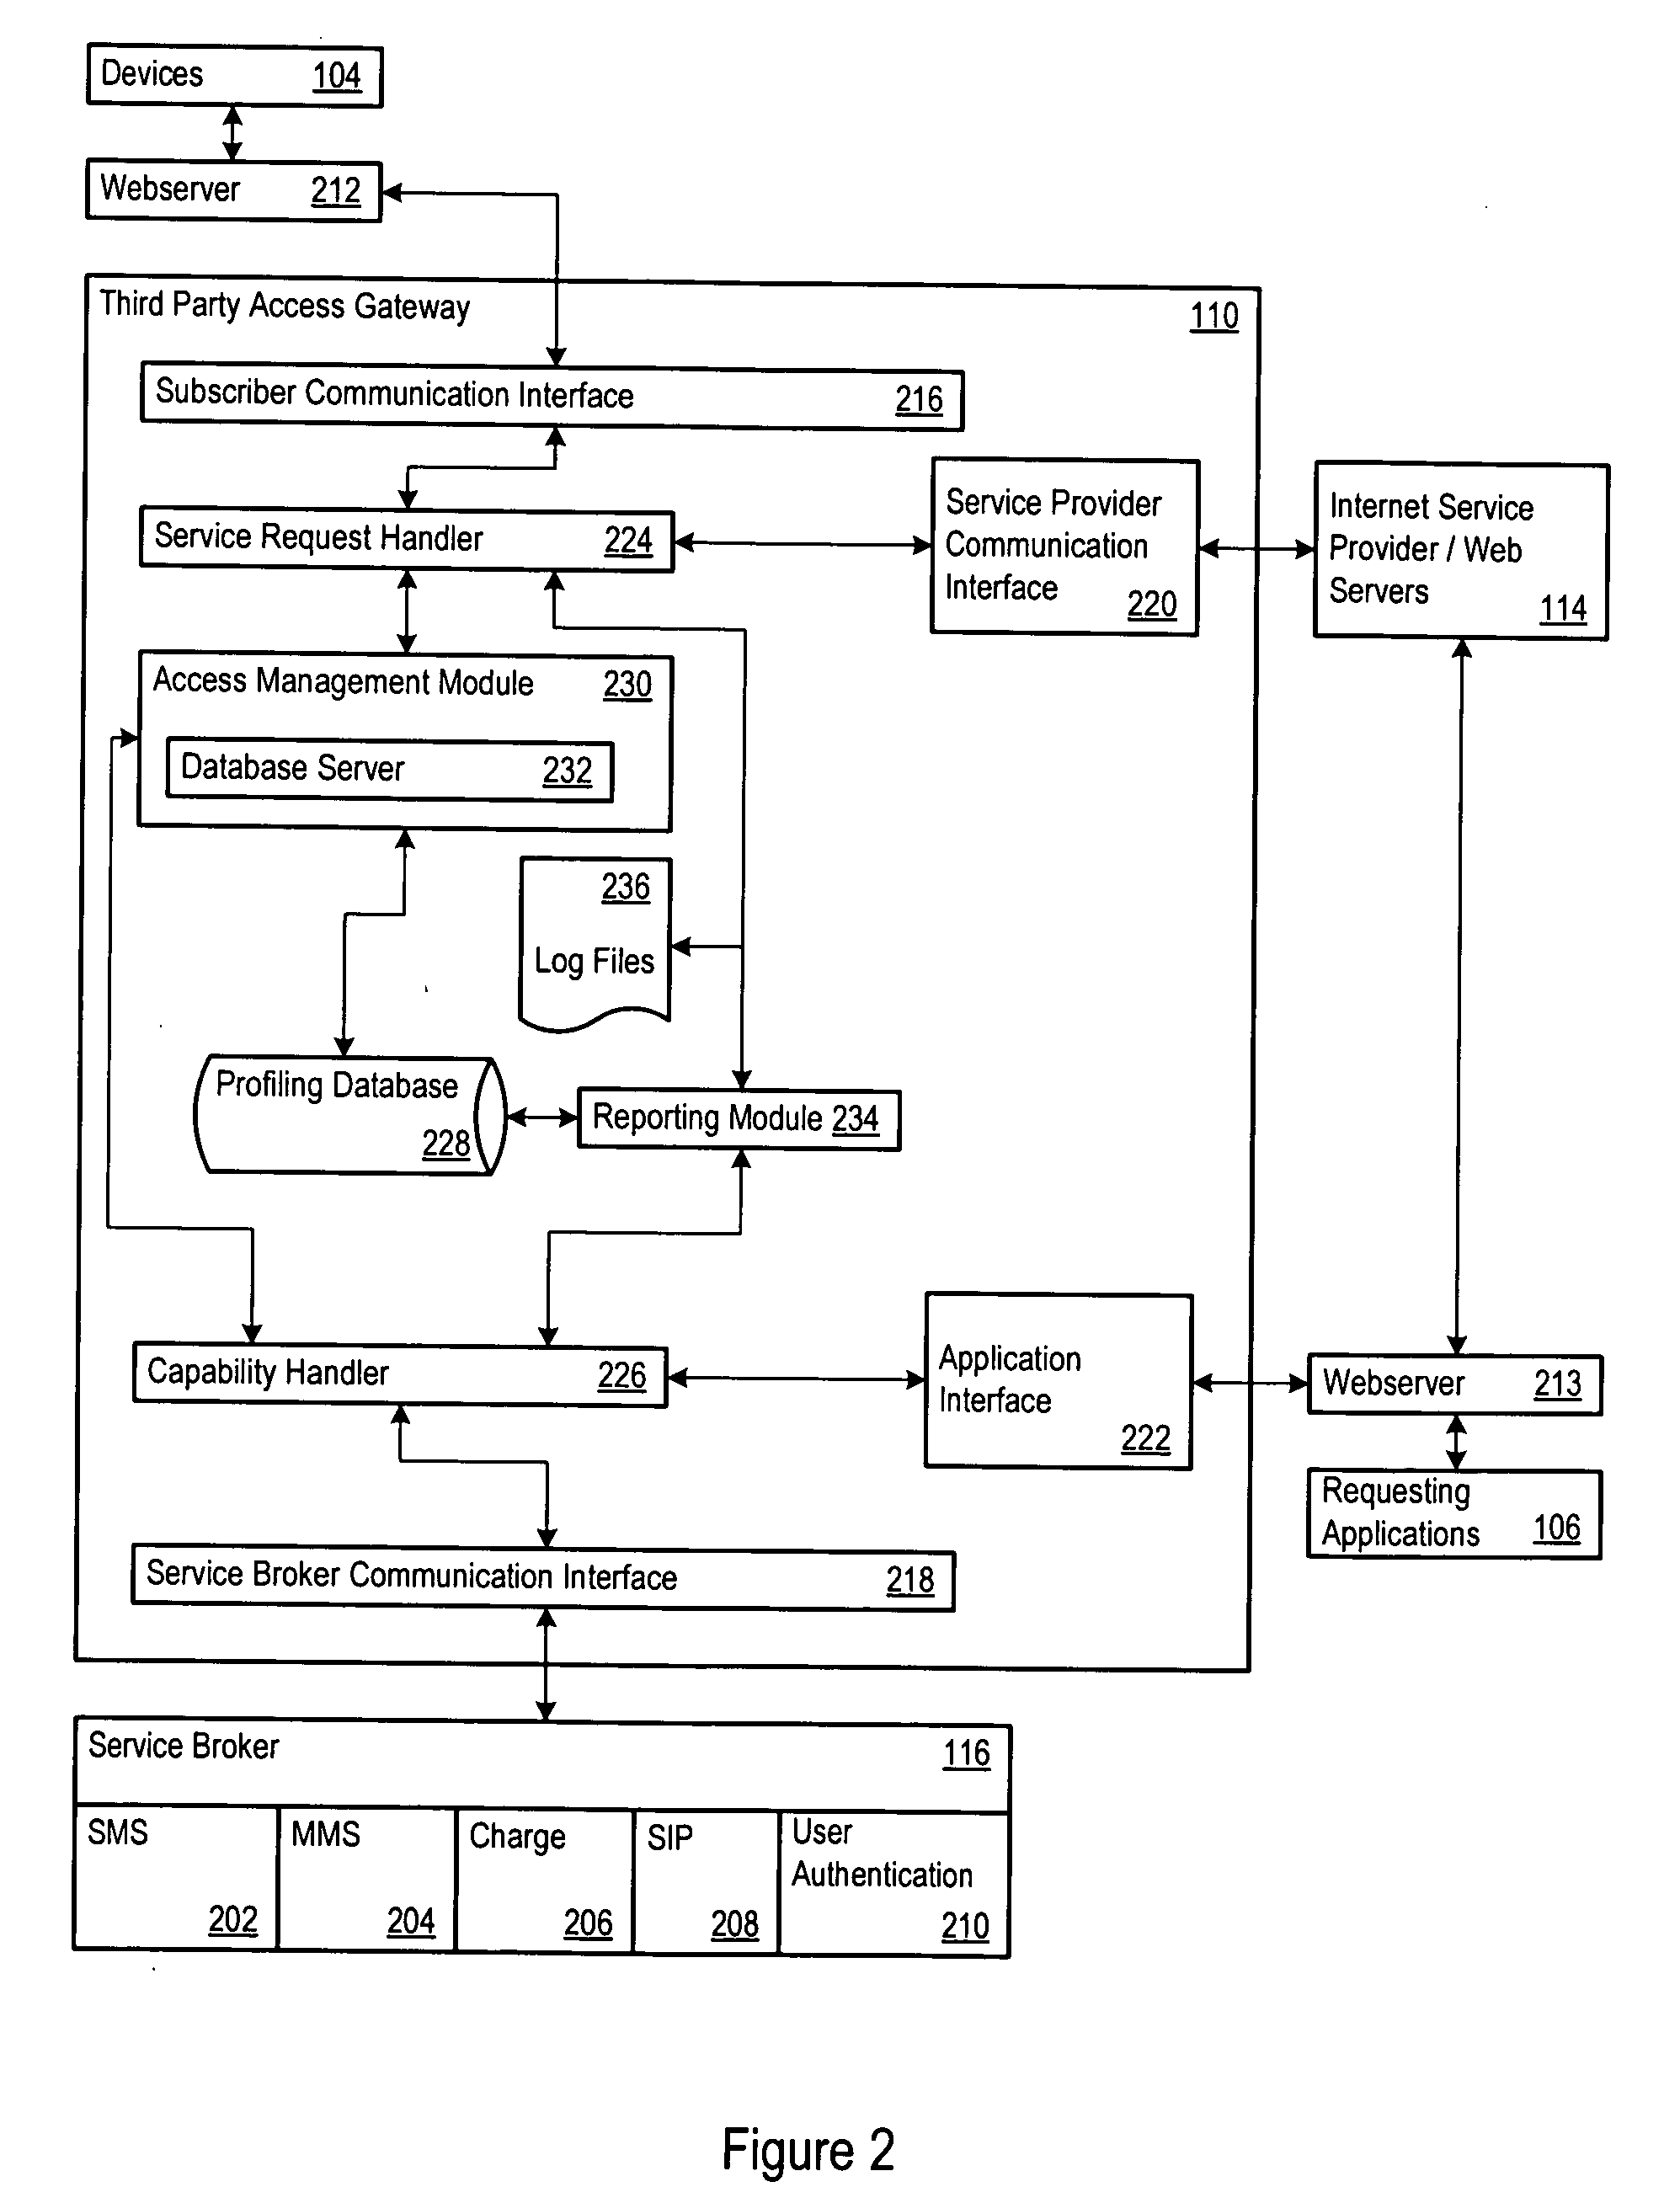 Authentication and authorization architecture for an access gateway